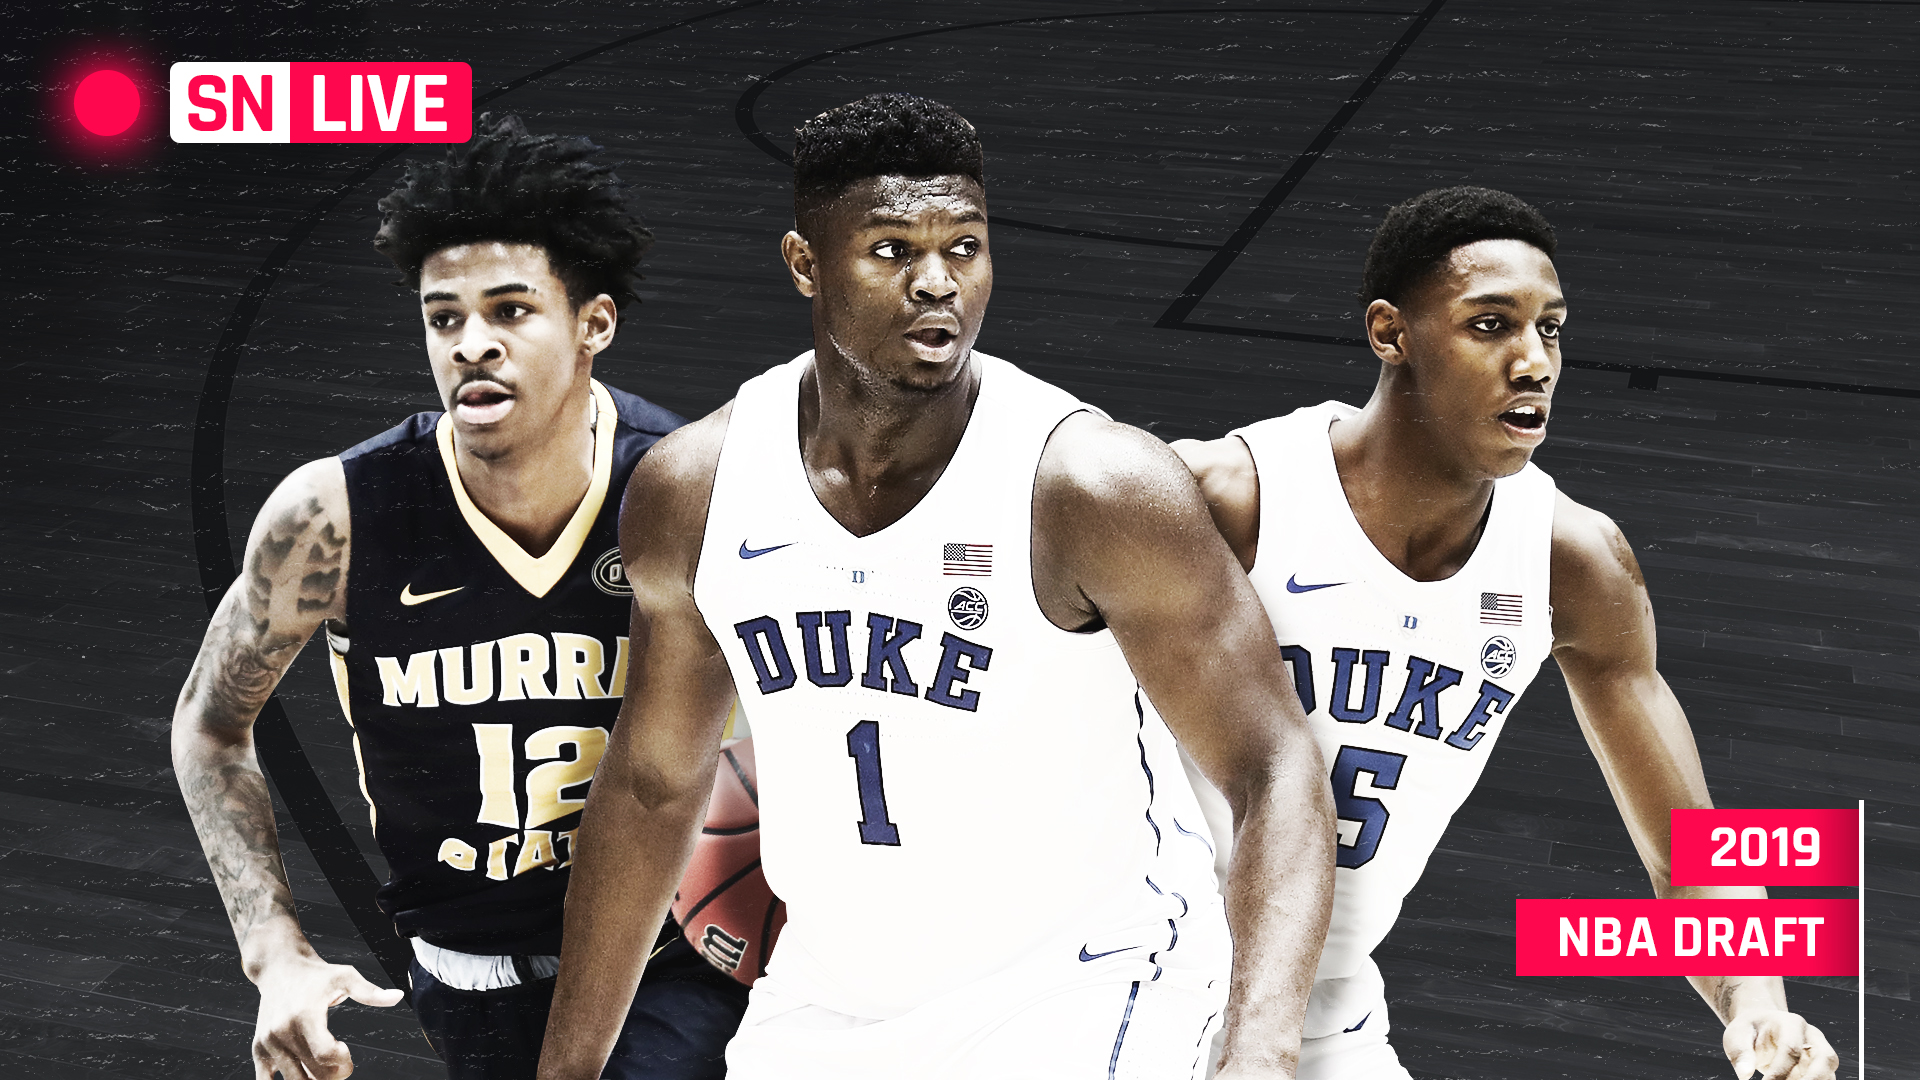 NBA Draft tracker 2019: Live results, grades, pick analysis for Rounds 1-2 | Sporting News1920 x 1080